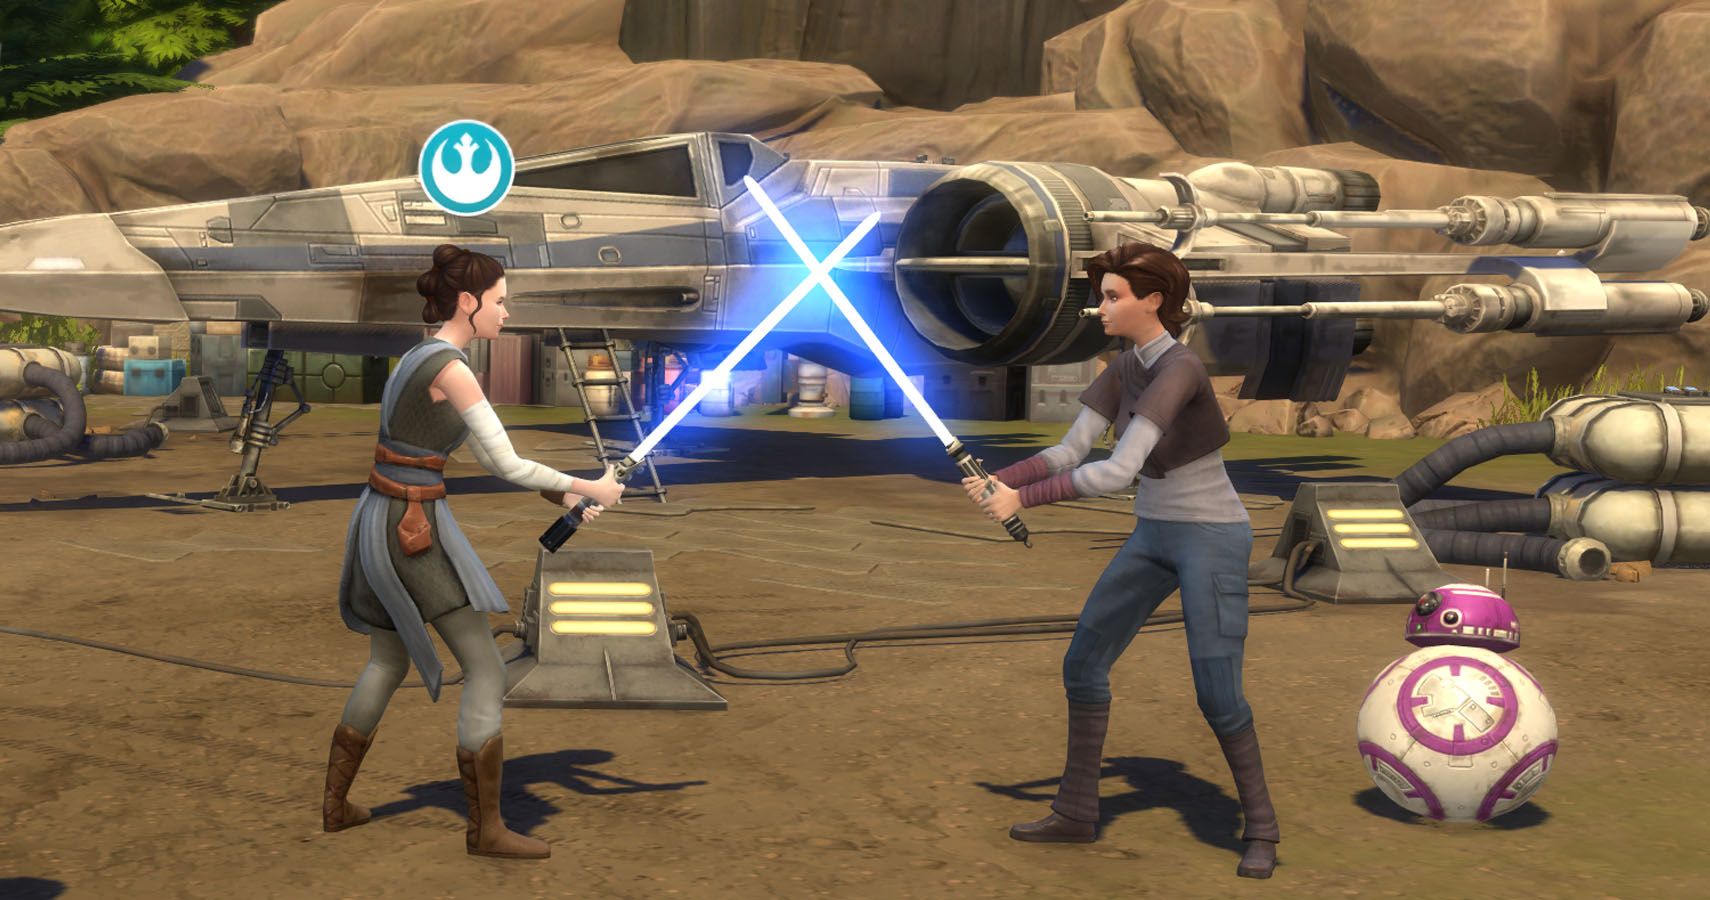 Rey and another Sim duel with lightsabers by an X-Wing.